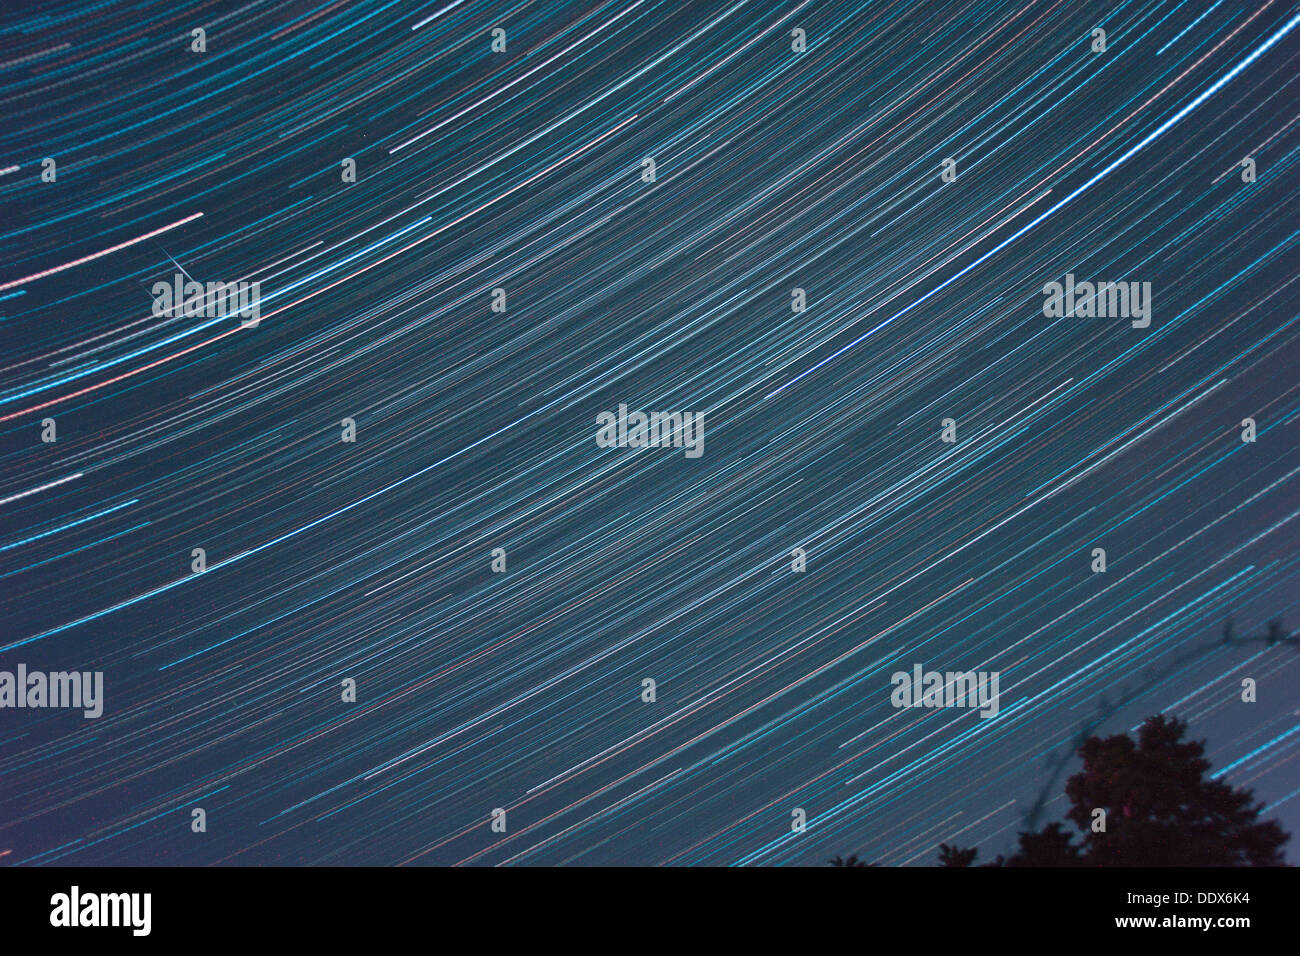 Star trails and two parallel satellite trails in a 4hr exposure image of dark skies in southern France. Stock Photo